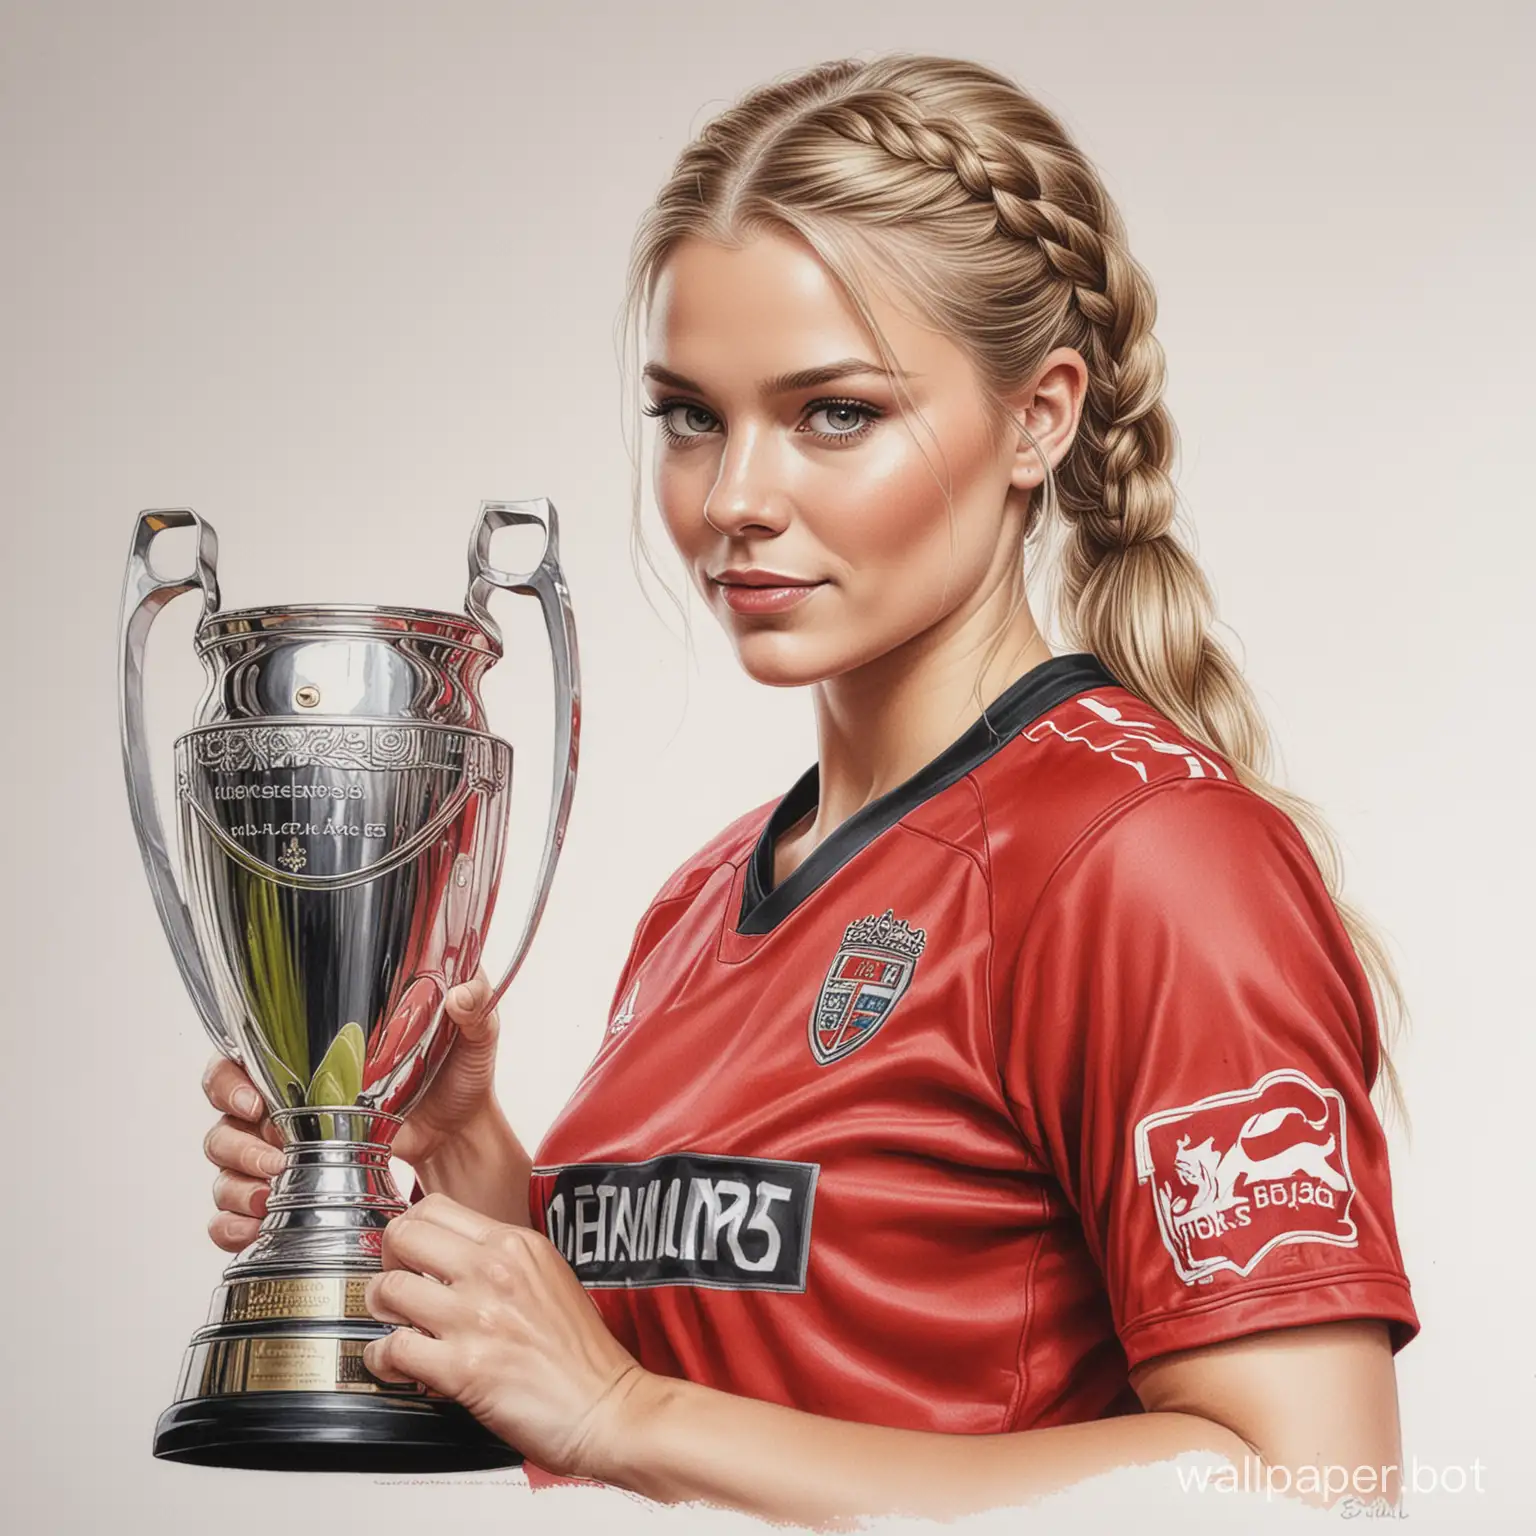 Young-Woman-Marta-Ilonen-in-Red-and-Black-Football-Uniform-Holding-Champions-Cup